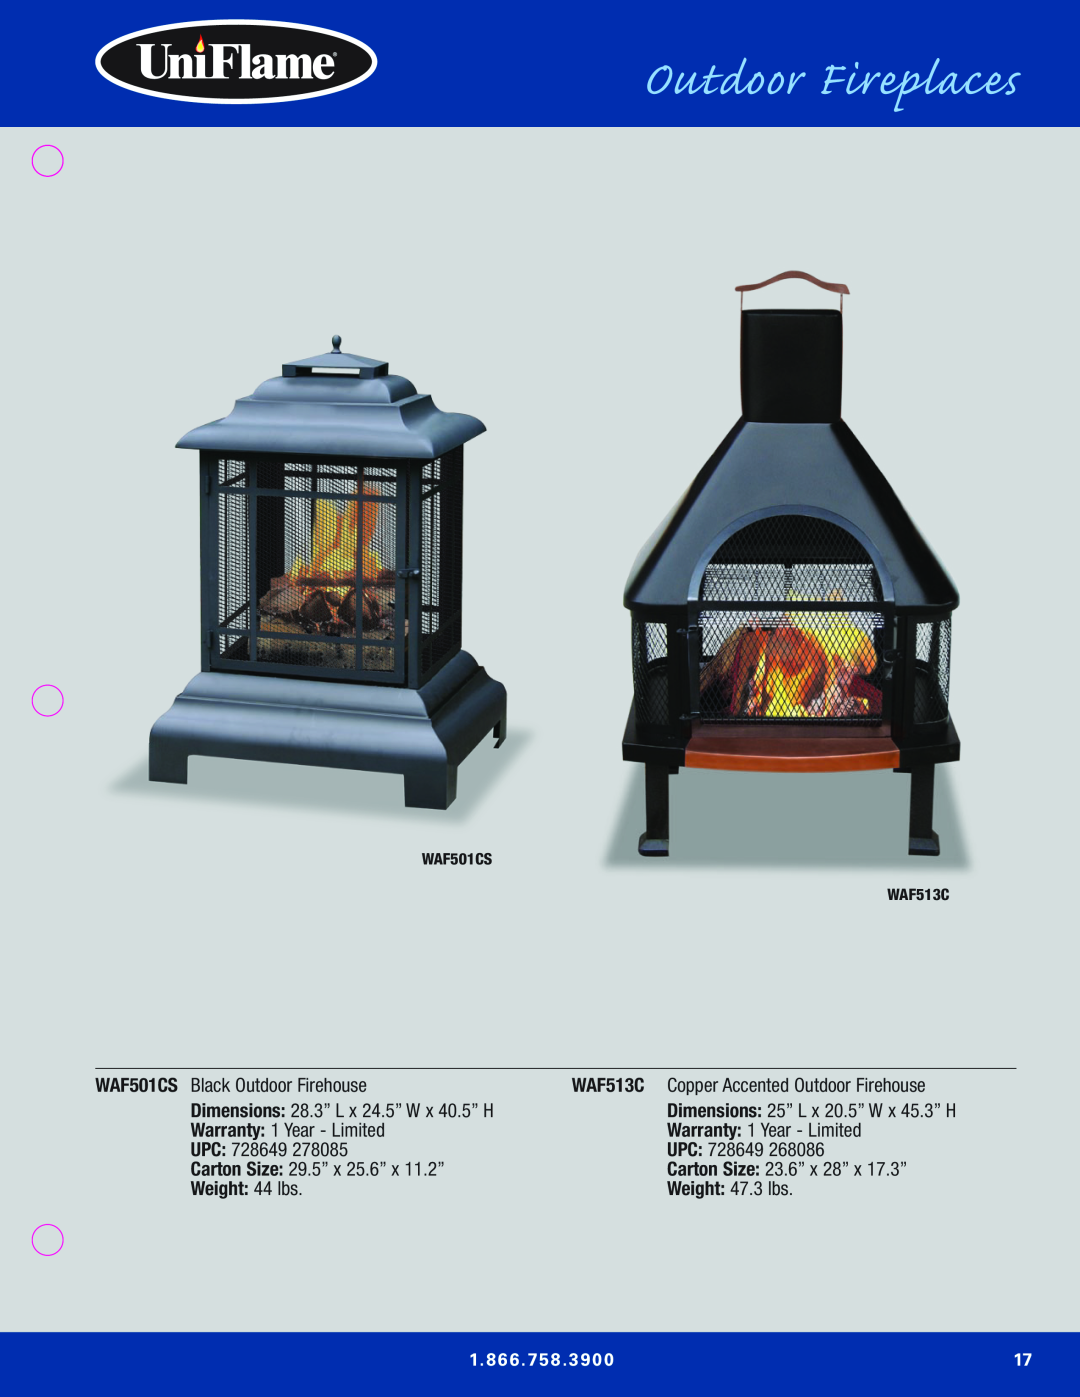 Blue Rhino Outdoor Lighting manual Outdoor Fireplaces, WAF501CS Black Outdoor Firehouse 